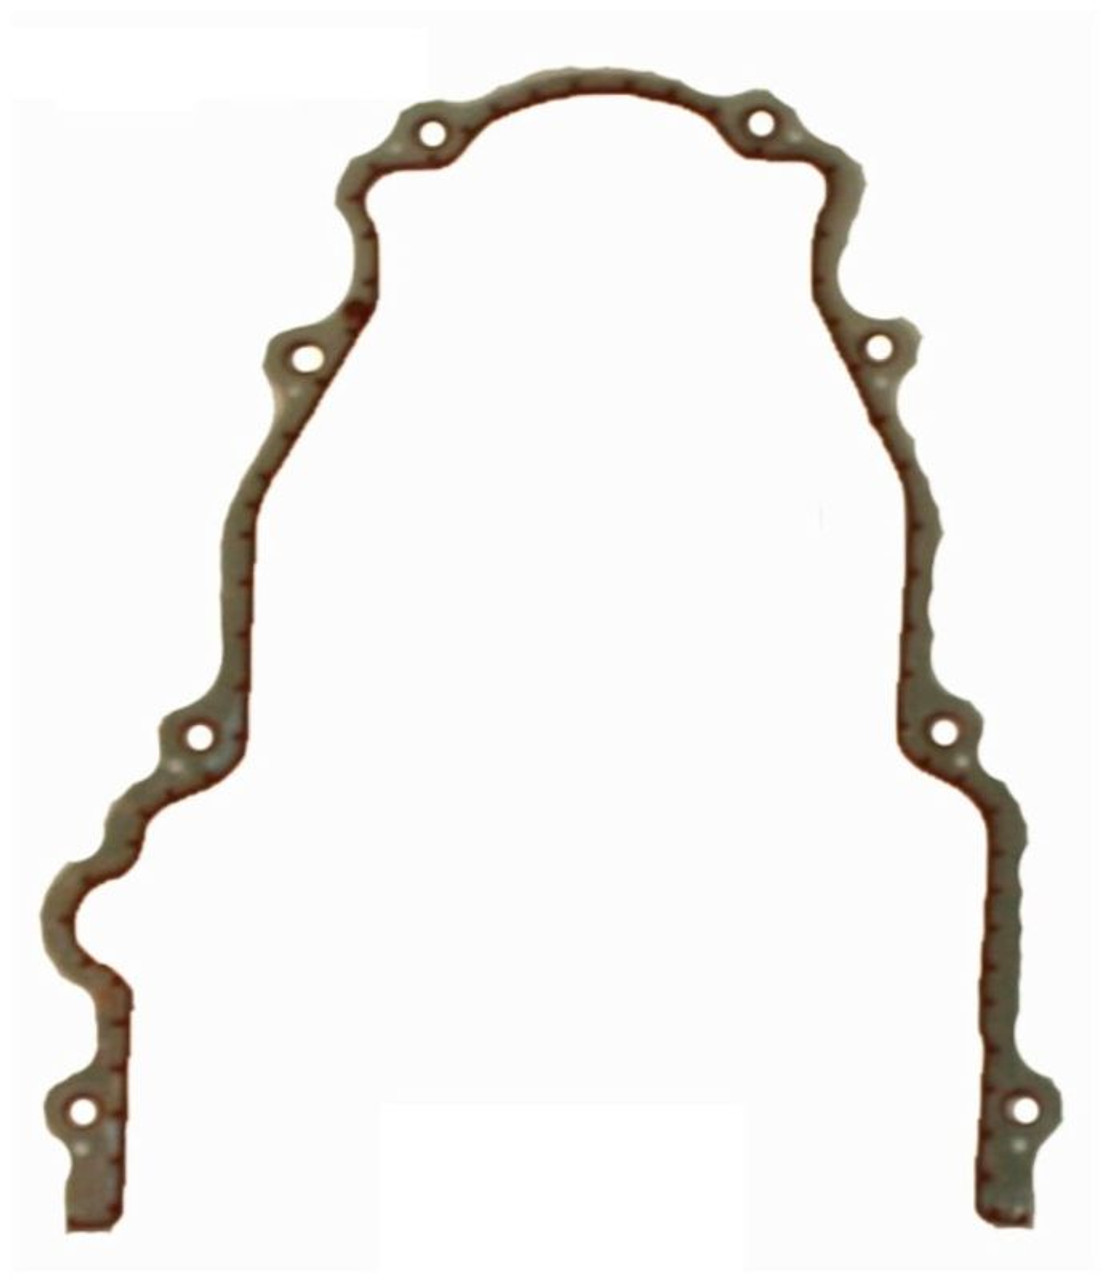 2013 Chevrolet Suburban 2500 6.0L Engine Timing Cover Gasket TCG293-A -838